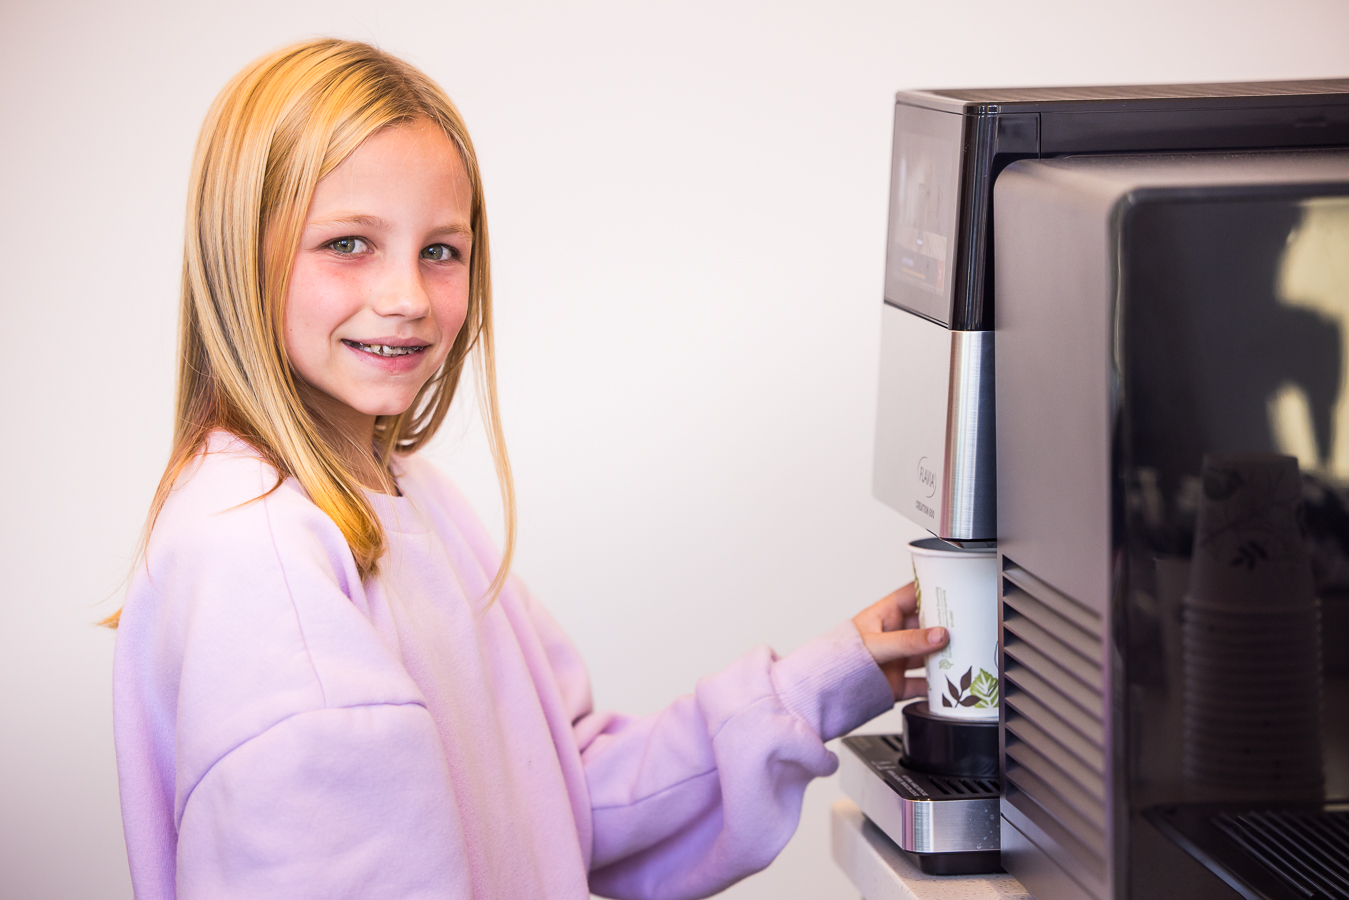 pa commerical photographer, Lisa rhinehart, captures this image of a young girl getting a drink out of the machine at west chester orthodontics in pa 